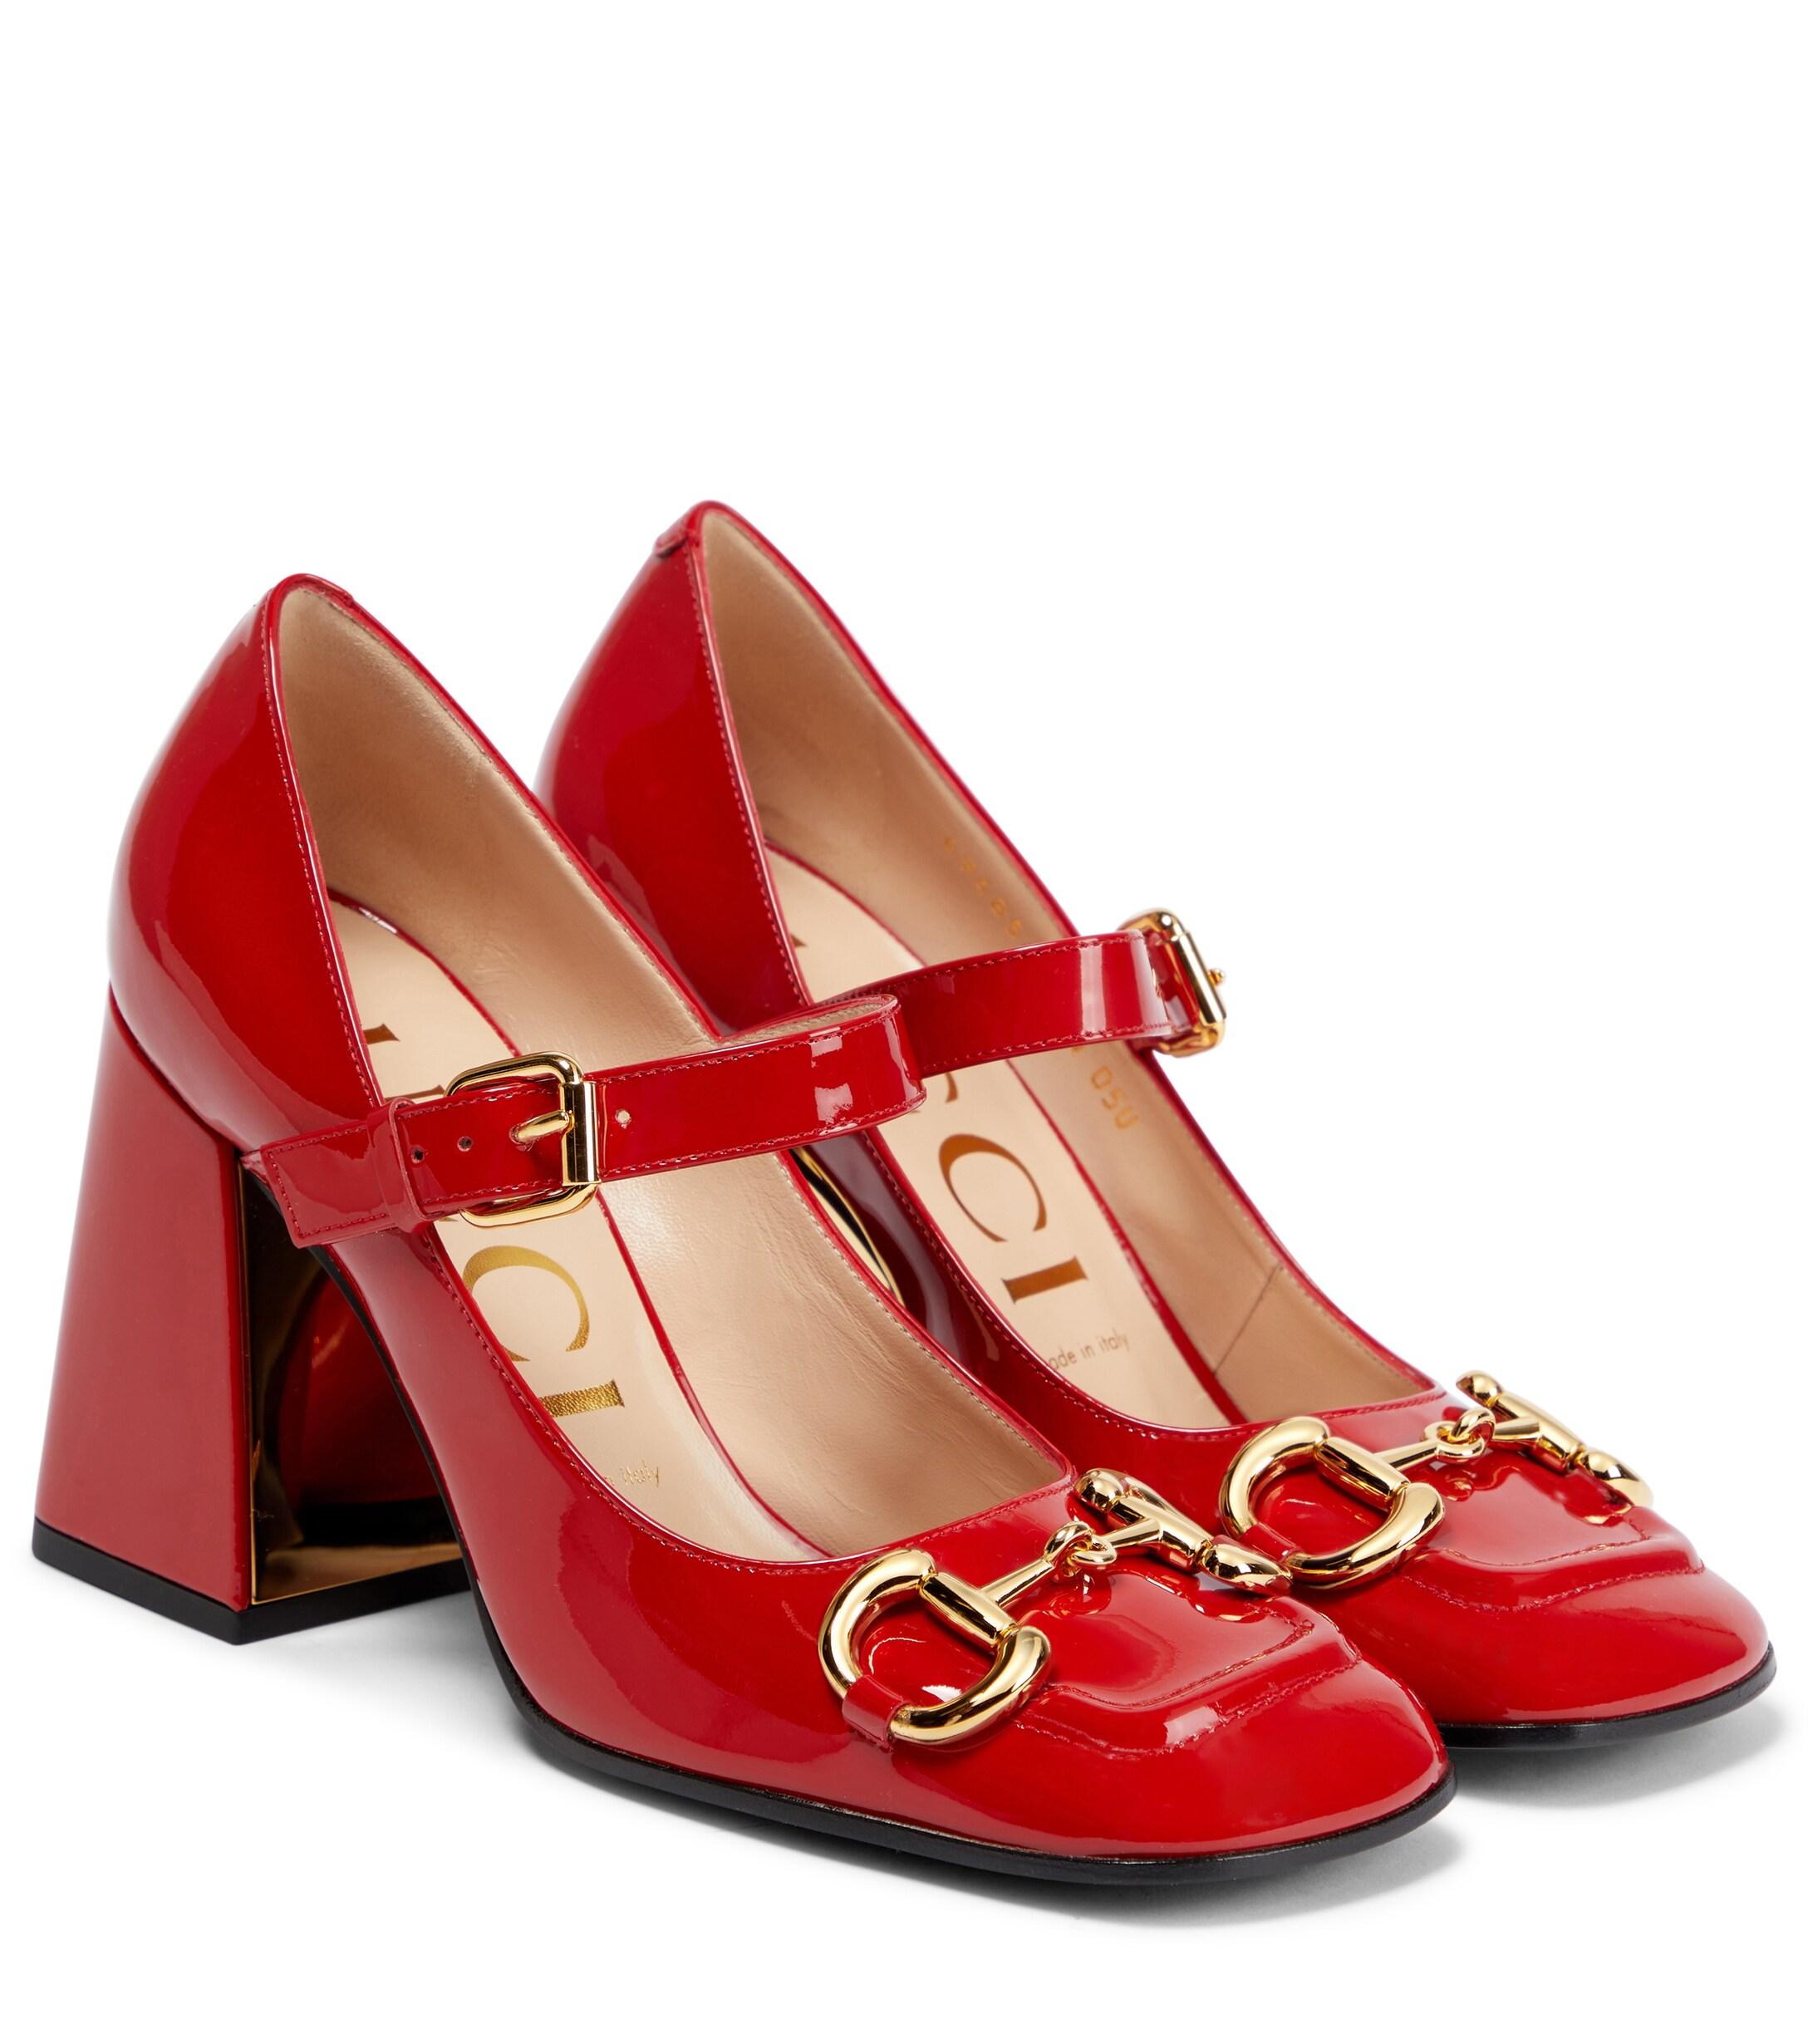 Gucci Horsebit Leather Mary Jane Pumps in Red | Lyst Australia